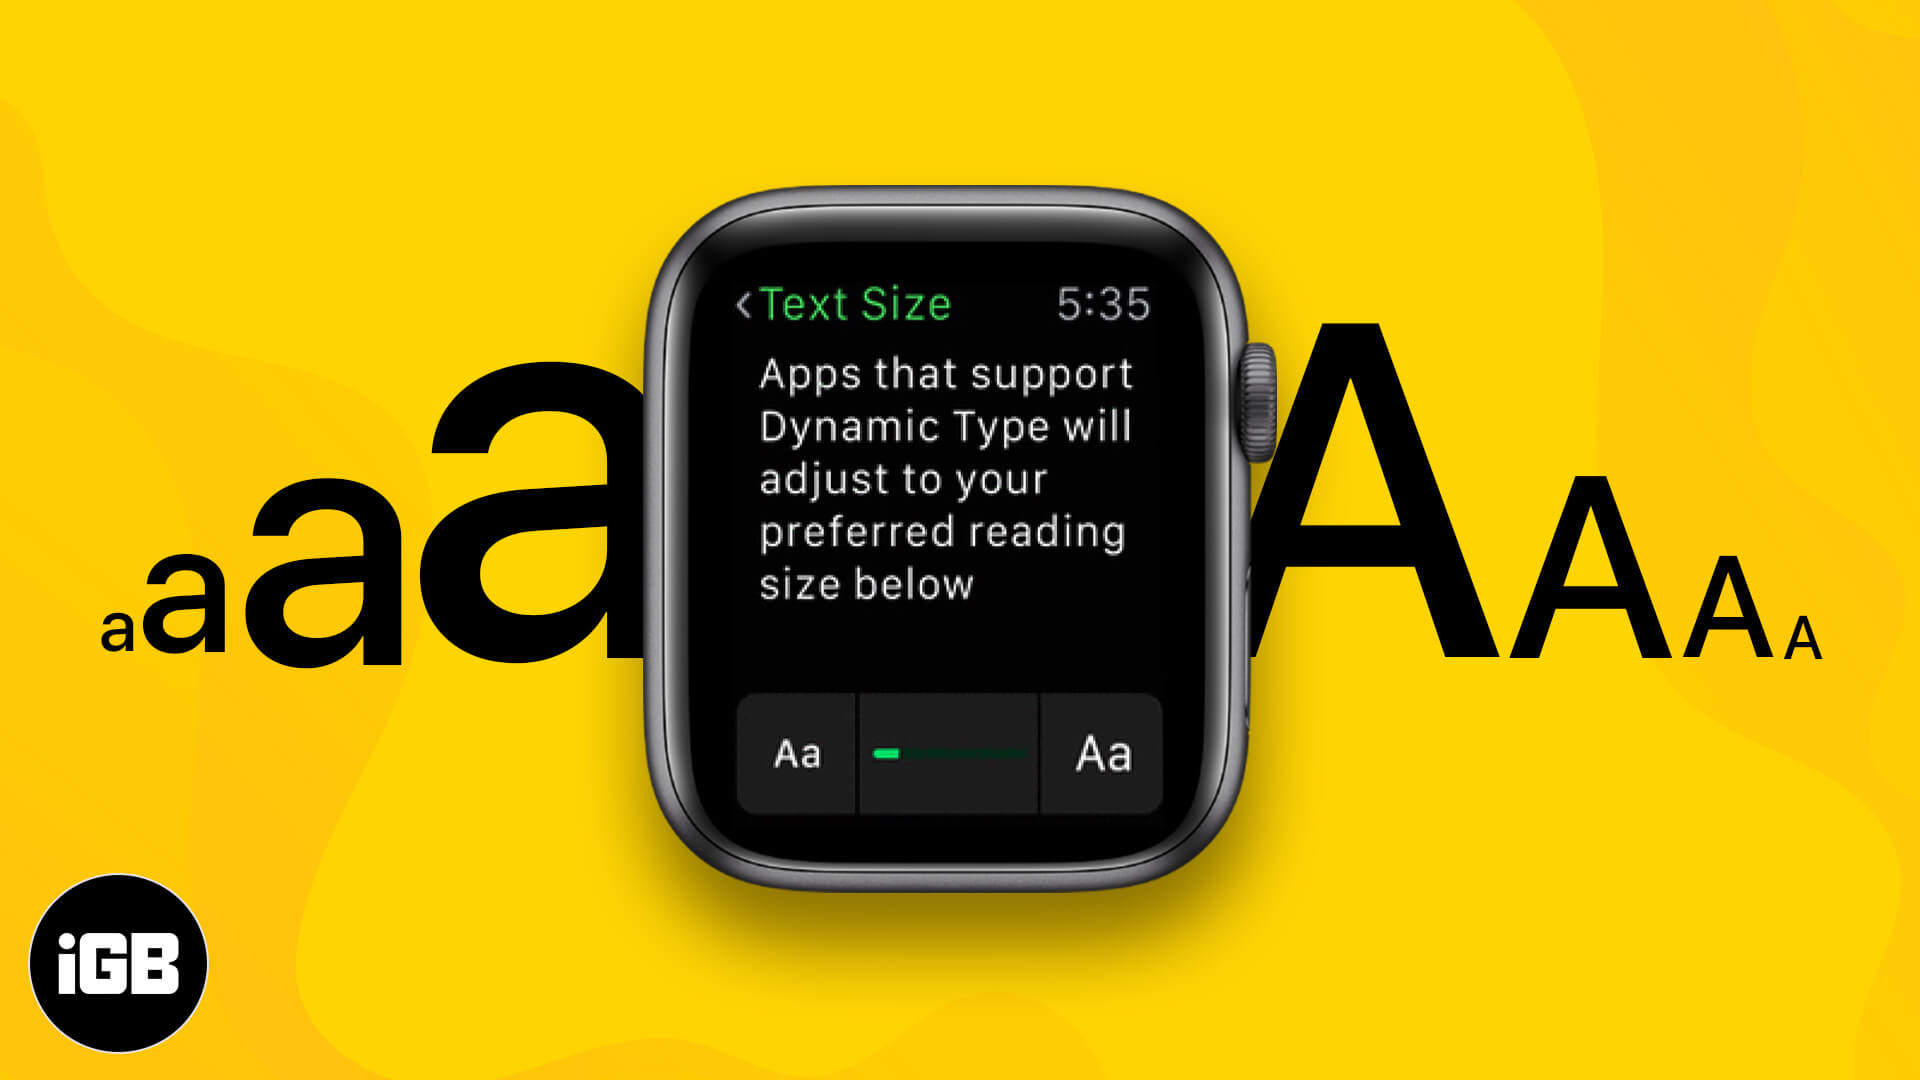 How to increase or change text size on apple watch